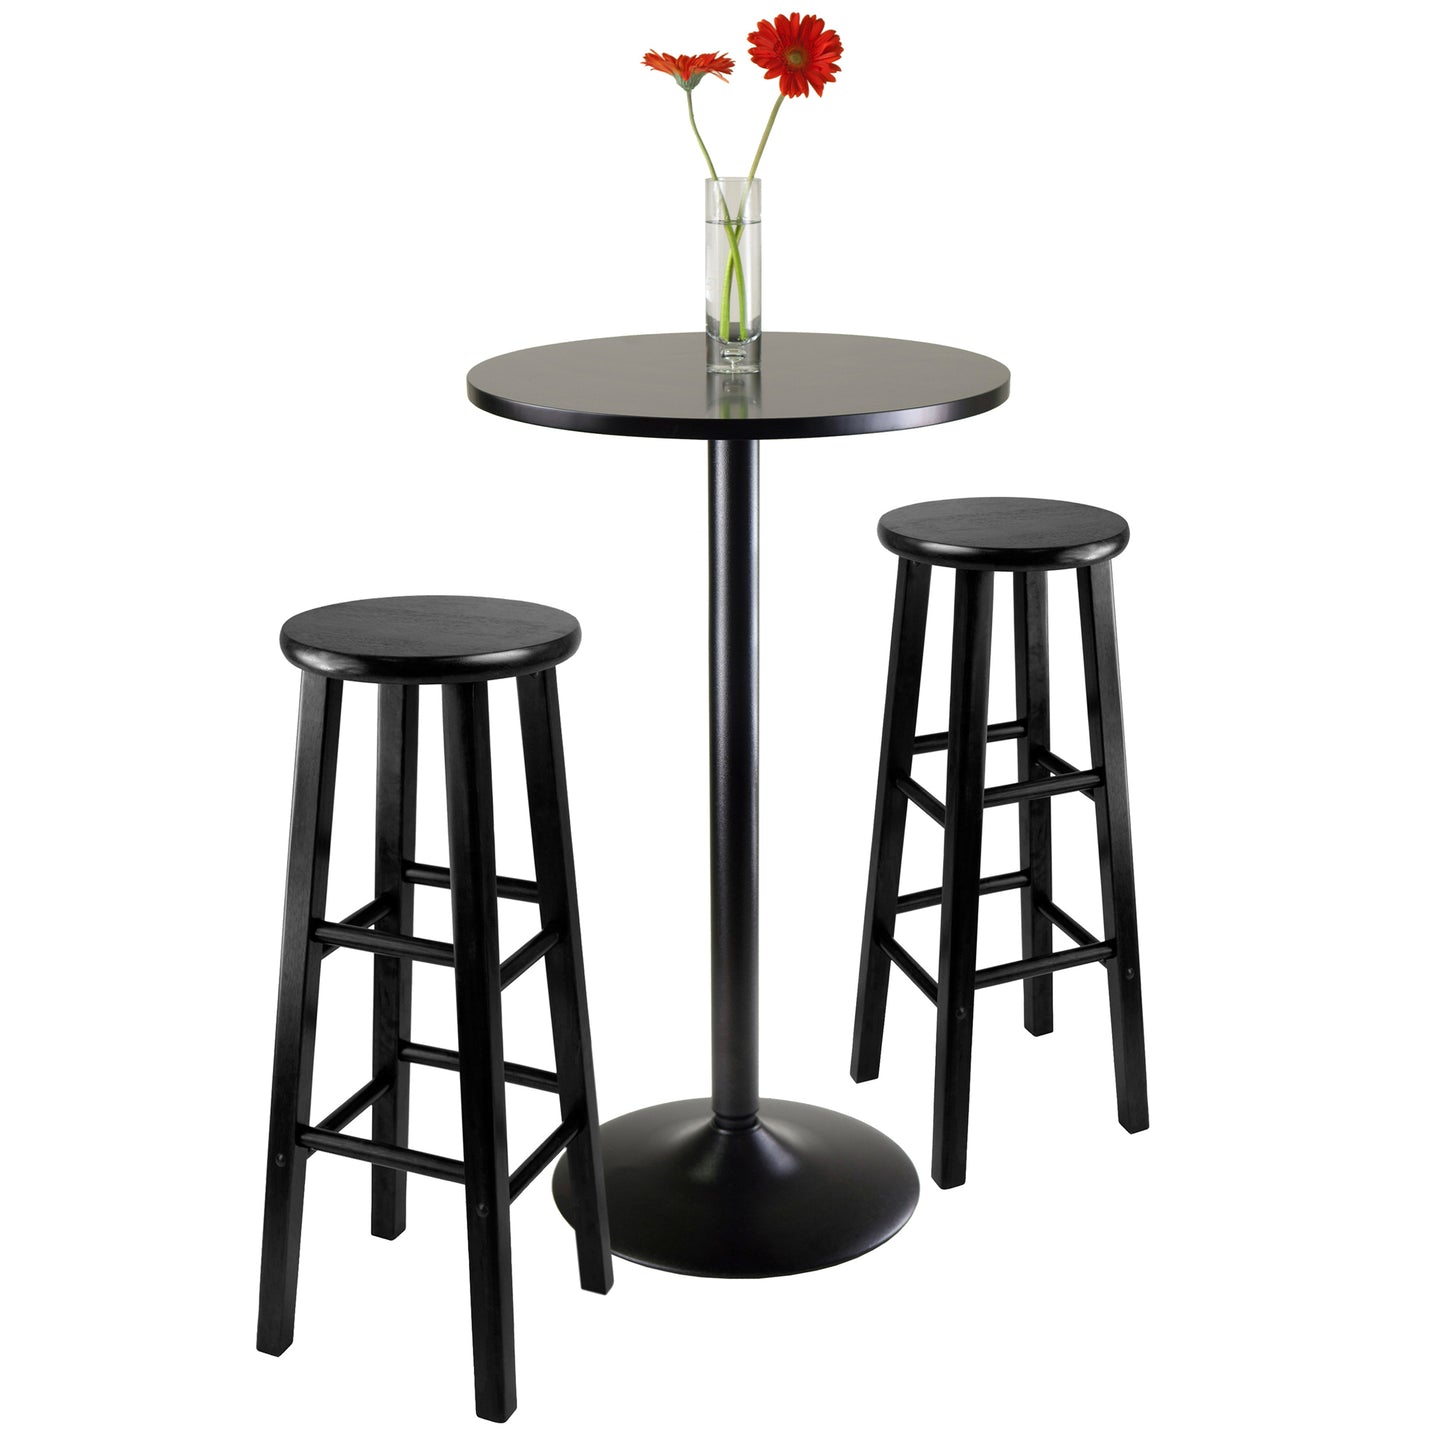 Obsidian 3-Pc Round Pub Table and Round Seat Bar Stools, Black